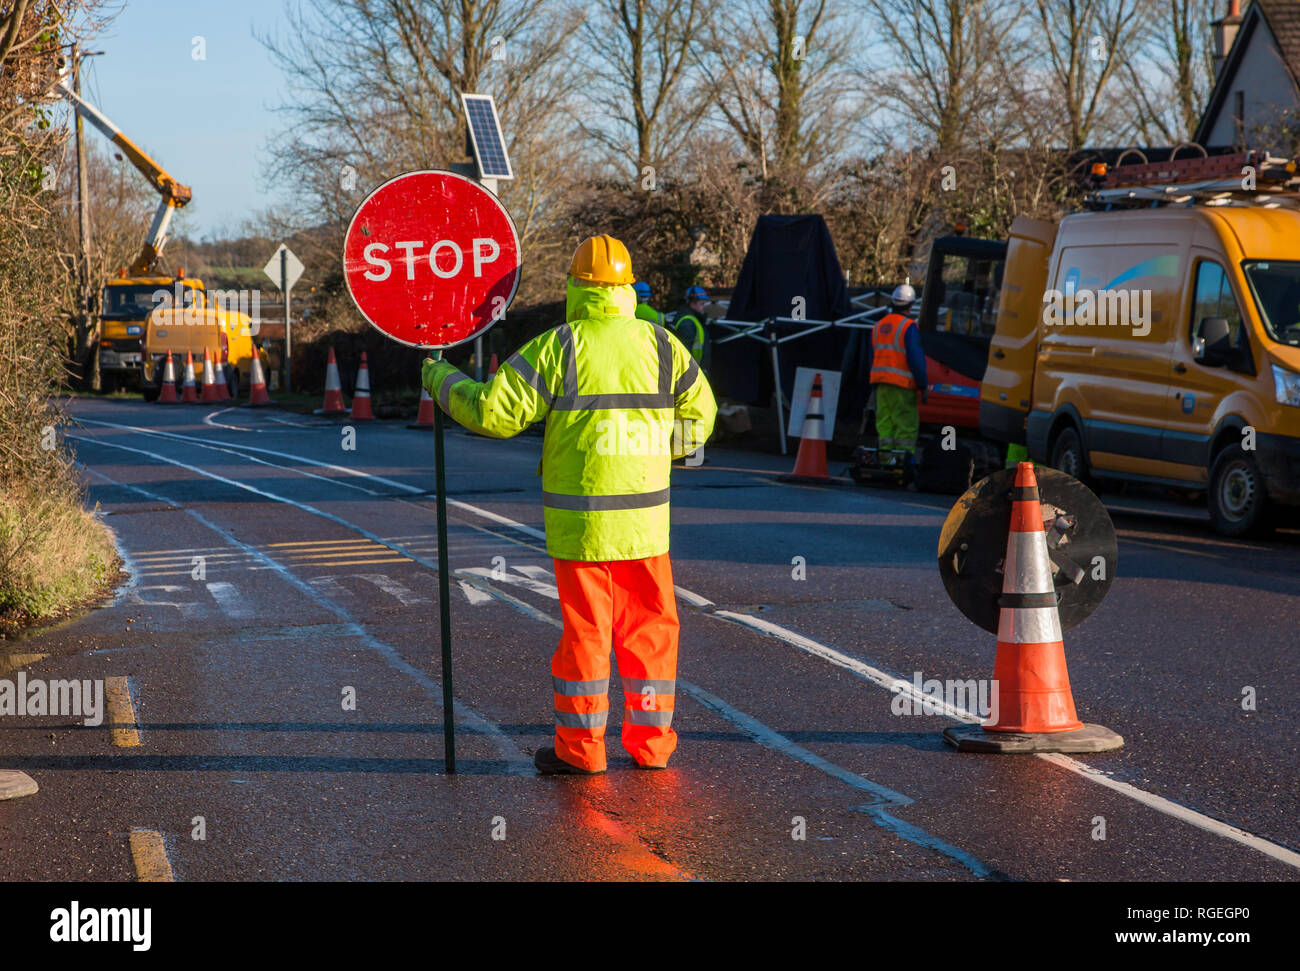 Carrigaline, Cork, Ireland. 29th January, 2019. An electric company stop and go man controls traffic flow while engineers work on power lines in Carrigaline, Co. Cork, Ireland Credit: David Creedon/Alamy Live News  Stock Photo